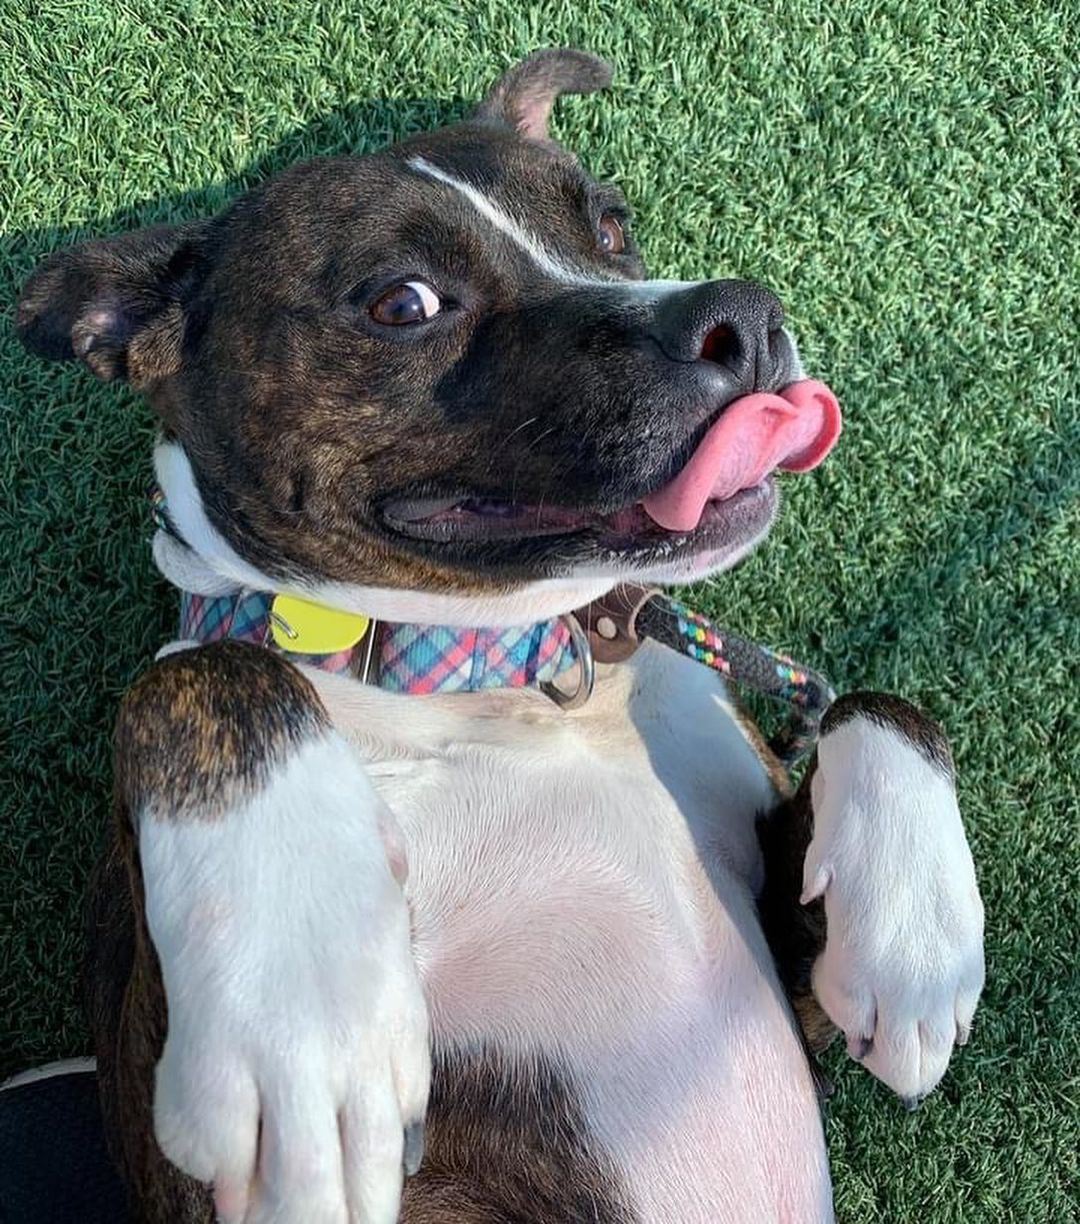 <a target='_blank' href='https://www.instagram.com/explore/tags/TongueOutTuesday/'>#TongueOutTuesday</a>😛 Exuberant RosaLee is like a ray of sunshine. It's hard not to pick up on and share her zest for life! 

This silly sweetheart is always excited to get outside for walks, making for pleasant company. In the play yard, one of her signature moves is bursting into zoomies and then flipping onto her back for belly rubs. She seems to be a nice balance of active and playful as well as attentive and sweet. With other dogs in play group, she was social and playful. 

We could see her making a loving new family member! RosaLee is estimated to be around 3 years old and weighs 58 lbs. 

Visit www.tinyurl.com/meetacitydog to set up a meet!
.
.
.
<a target='_blank' href='https://www.instagram.com/explore/tags/adoptdontshop/'>#adoptdontshop</a> <a target='_blank' href='https://www.instagram.com/explore/tags/adoptme/'>#adoptme</a> <a target='_blank' href='https://www.instagram.com/explore/tags/citydogscle/'>#citydogscle</a> <a target='_blank' href='https://www.instagram.com/explore/tags/cledogs/'>#cledogs</a> <a target='_blank' href='https://www.instagram.com/explore/tags/dogsofcle/'>#dogsofcle</a> <a target='_blank' href='https://www.instagram.com/explore/tags/rescuedog/'>#rescuedog</a>